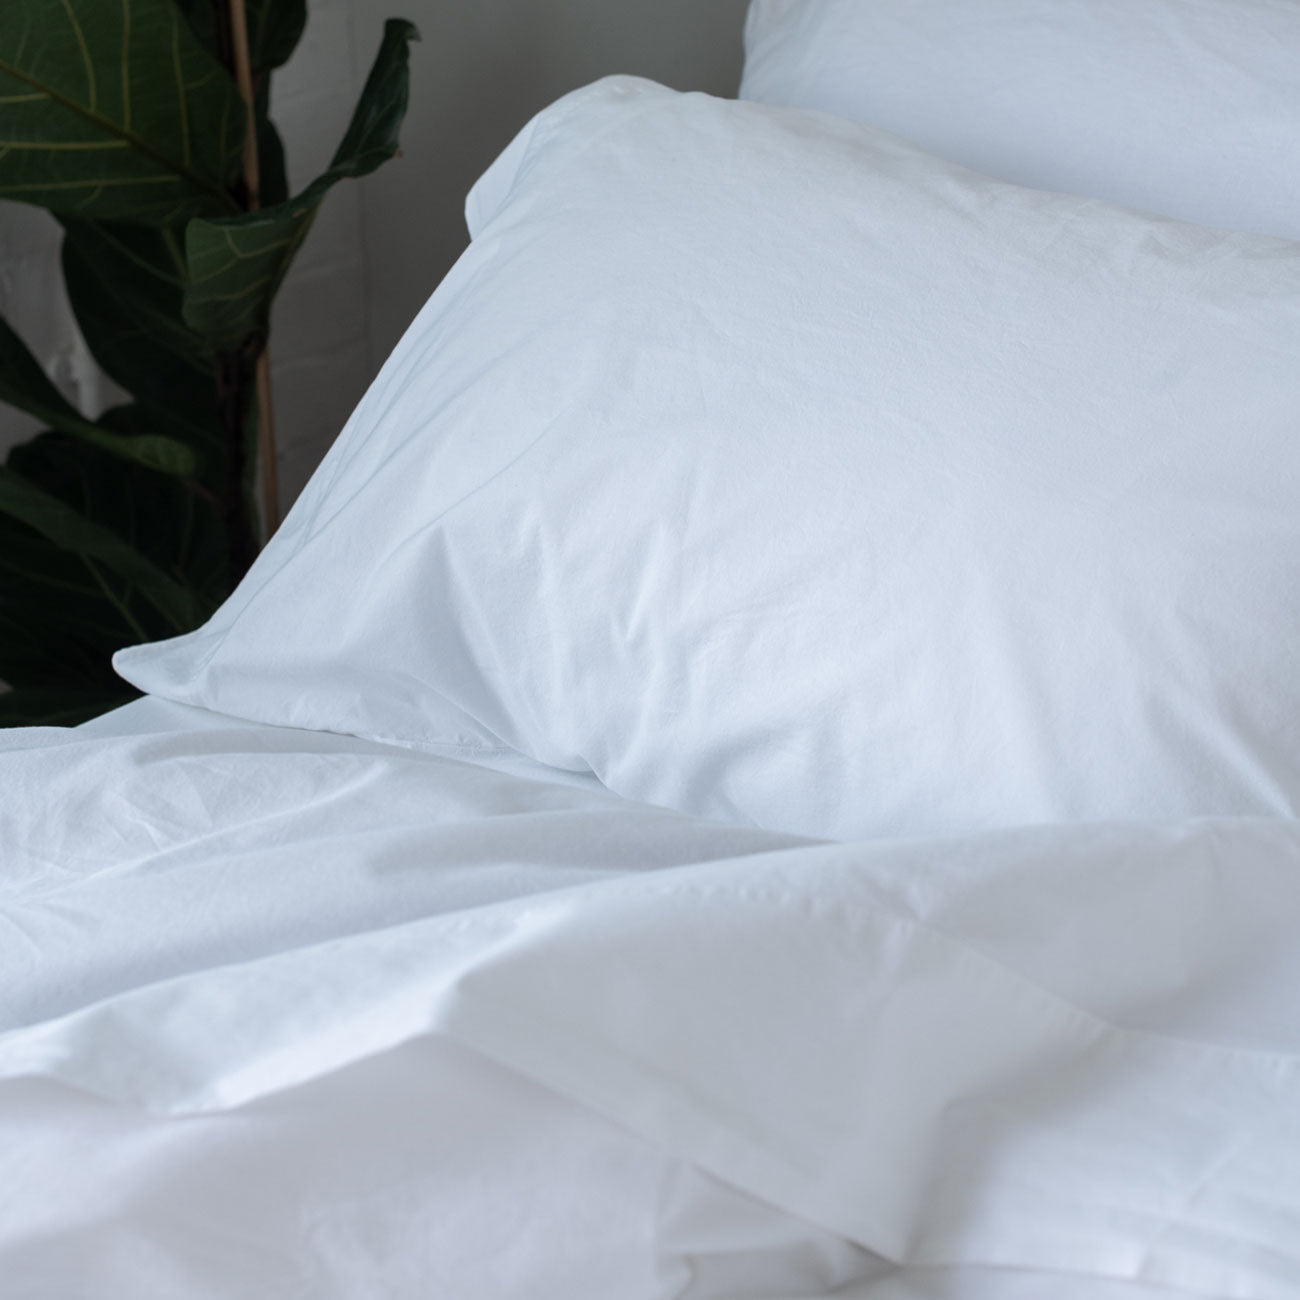 White Washed Cotton Percale Flat Sheet - Piglet in Bed